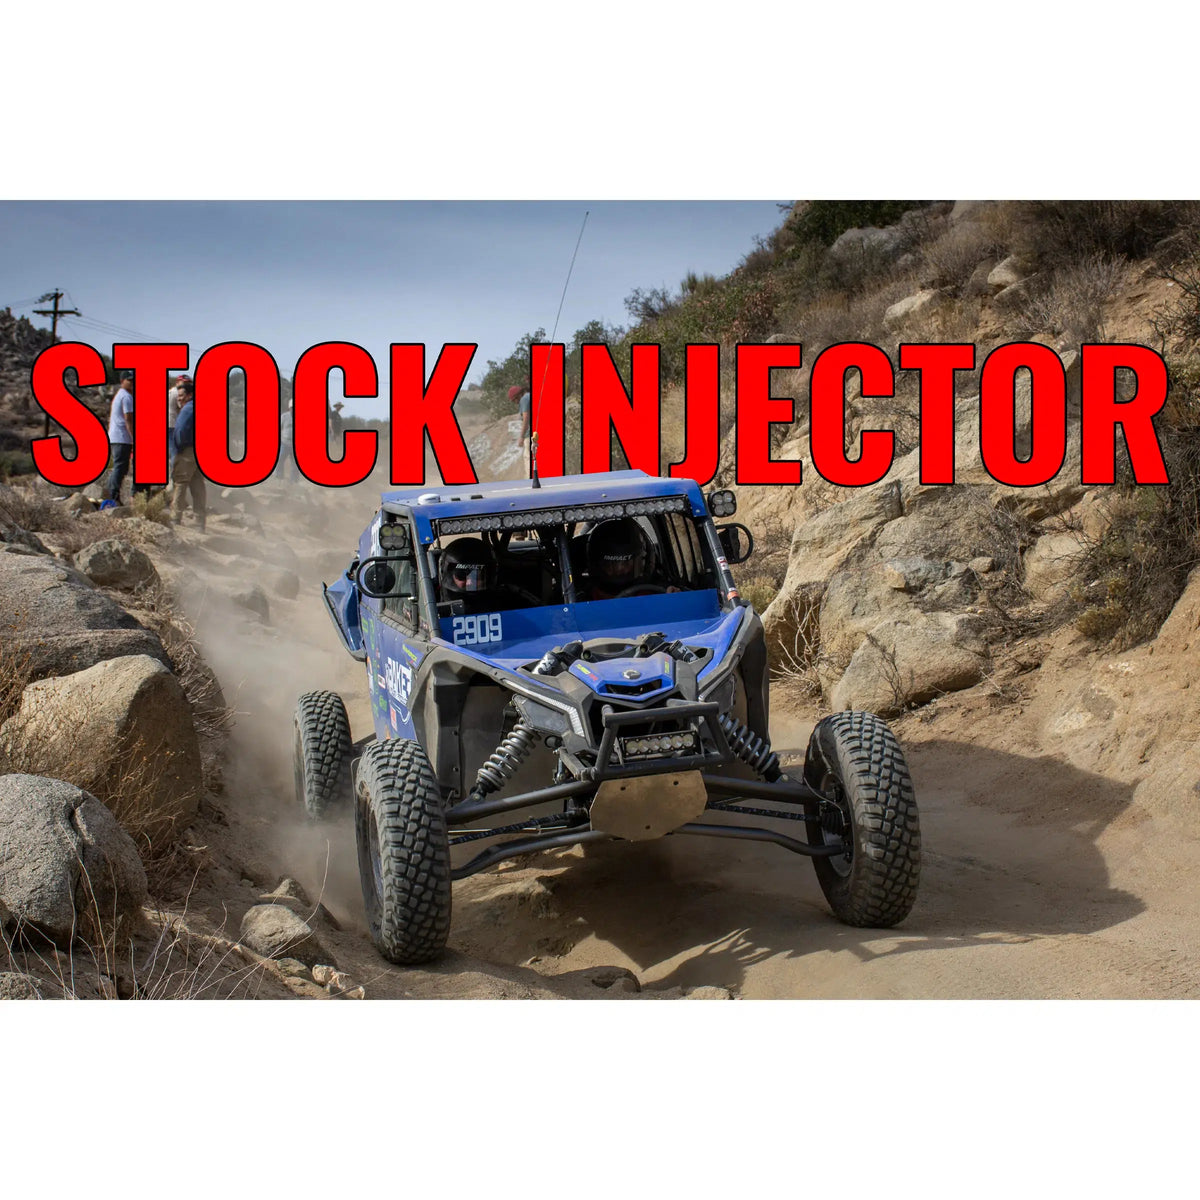 WSRD STOCK INJECTOR TUNING PACKAGES | CAN-AM X3 (177-247HP)-ECU Tune-Whalen-2018-2022 120HP Turbo WS160-DynoJet PV3 Power Vision-Black Market UTV